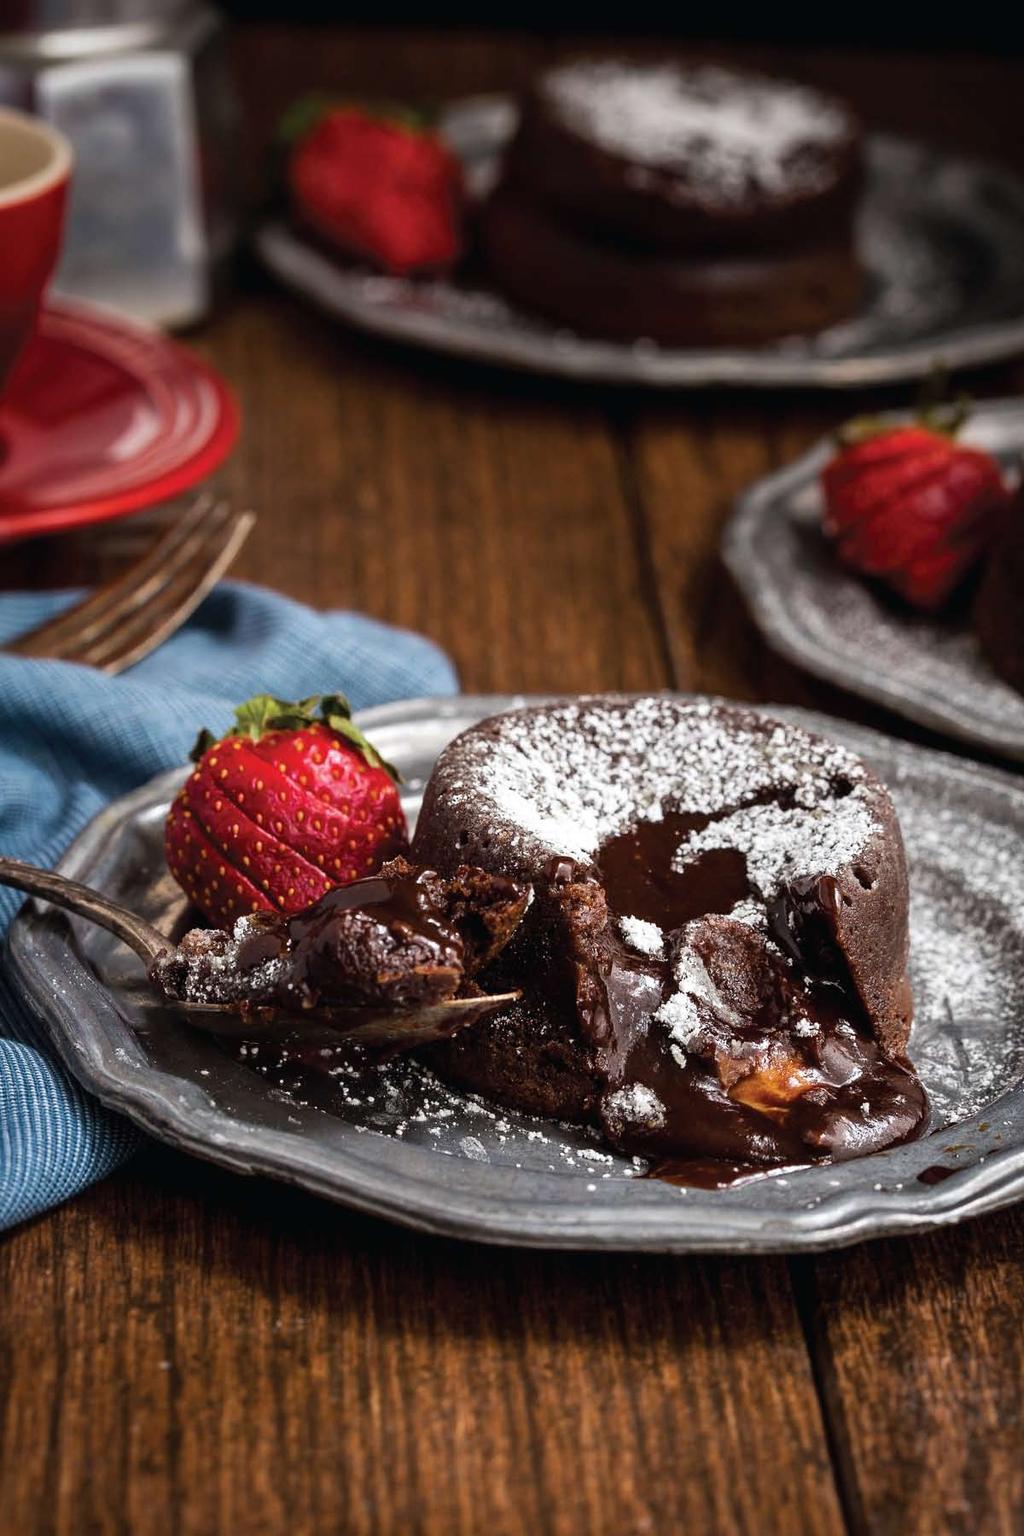 YIELD 4 SERVINGS PREP TIME 10 MINUTES COOKING TIME 9 MINUTES TOTAL TIME 19 MINUTES Fo he caramel candy filled choco ate lava cakes ½ CUP UNSALTED BUTTER + 1 TBSP, ROOM TEMPERATURE 4 OUNCES SEMI-SWEET